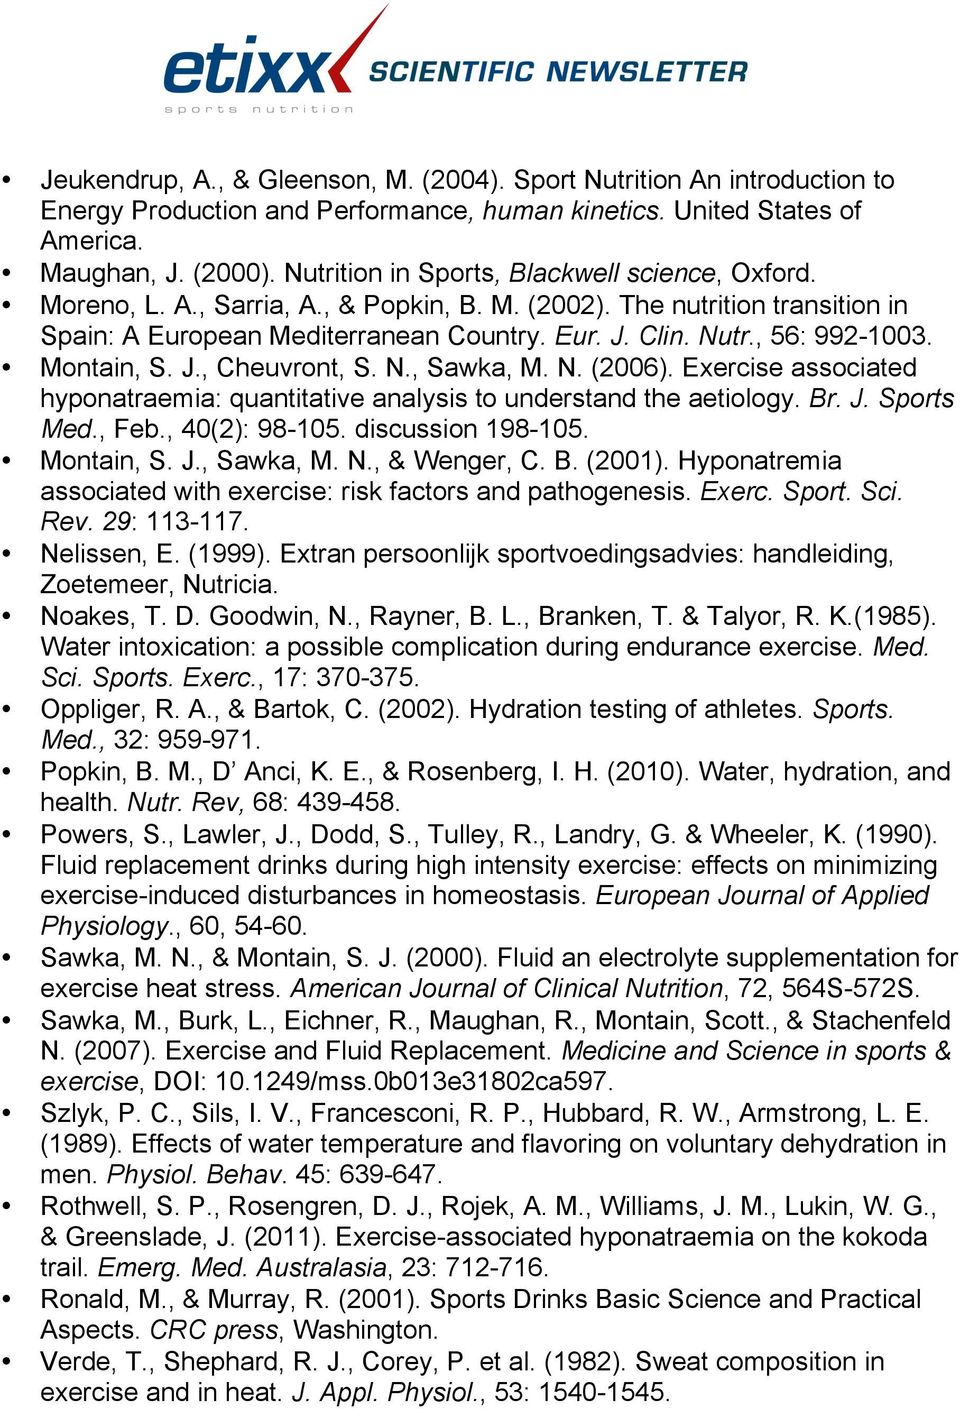 , 56: 992-1003. Montain, S. J., Cheuvront, S. N., Sawka, M. N. (2006). Exercise associated hyponatraemia: quantitative analysis to understand the aetiology. Br. J. Sports Med., Feb., 40(2): 98-105.